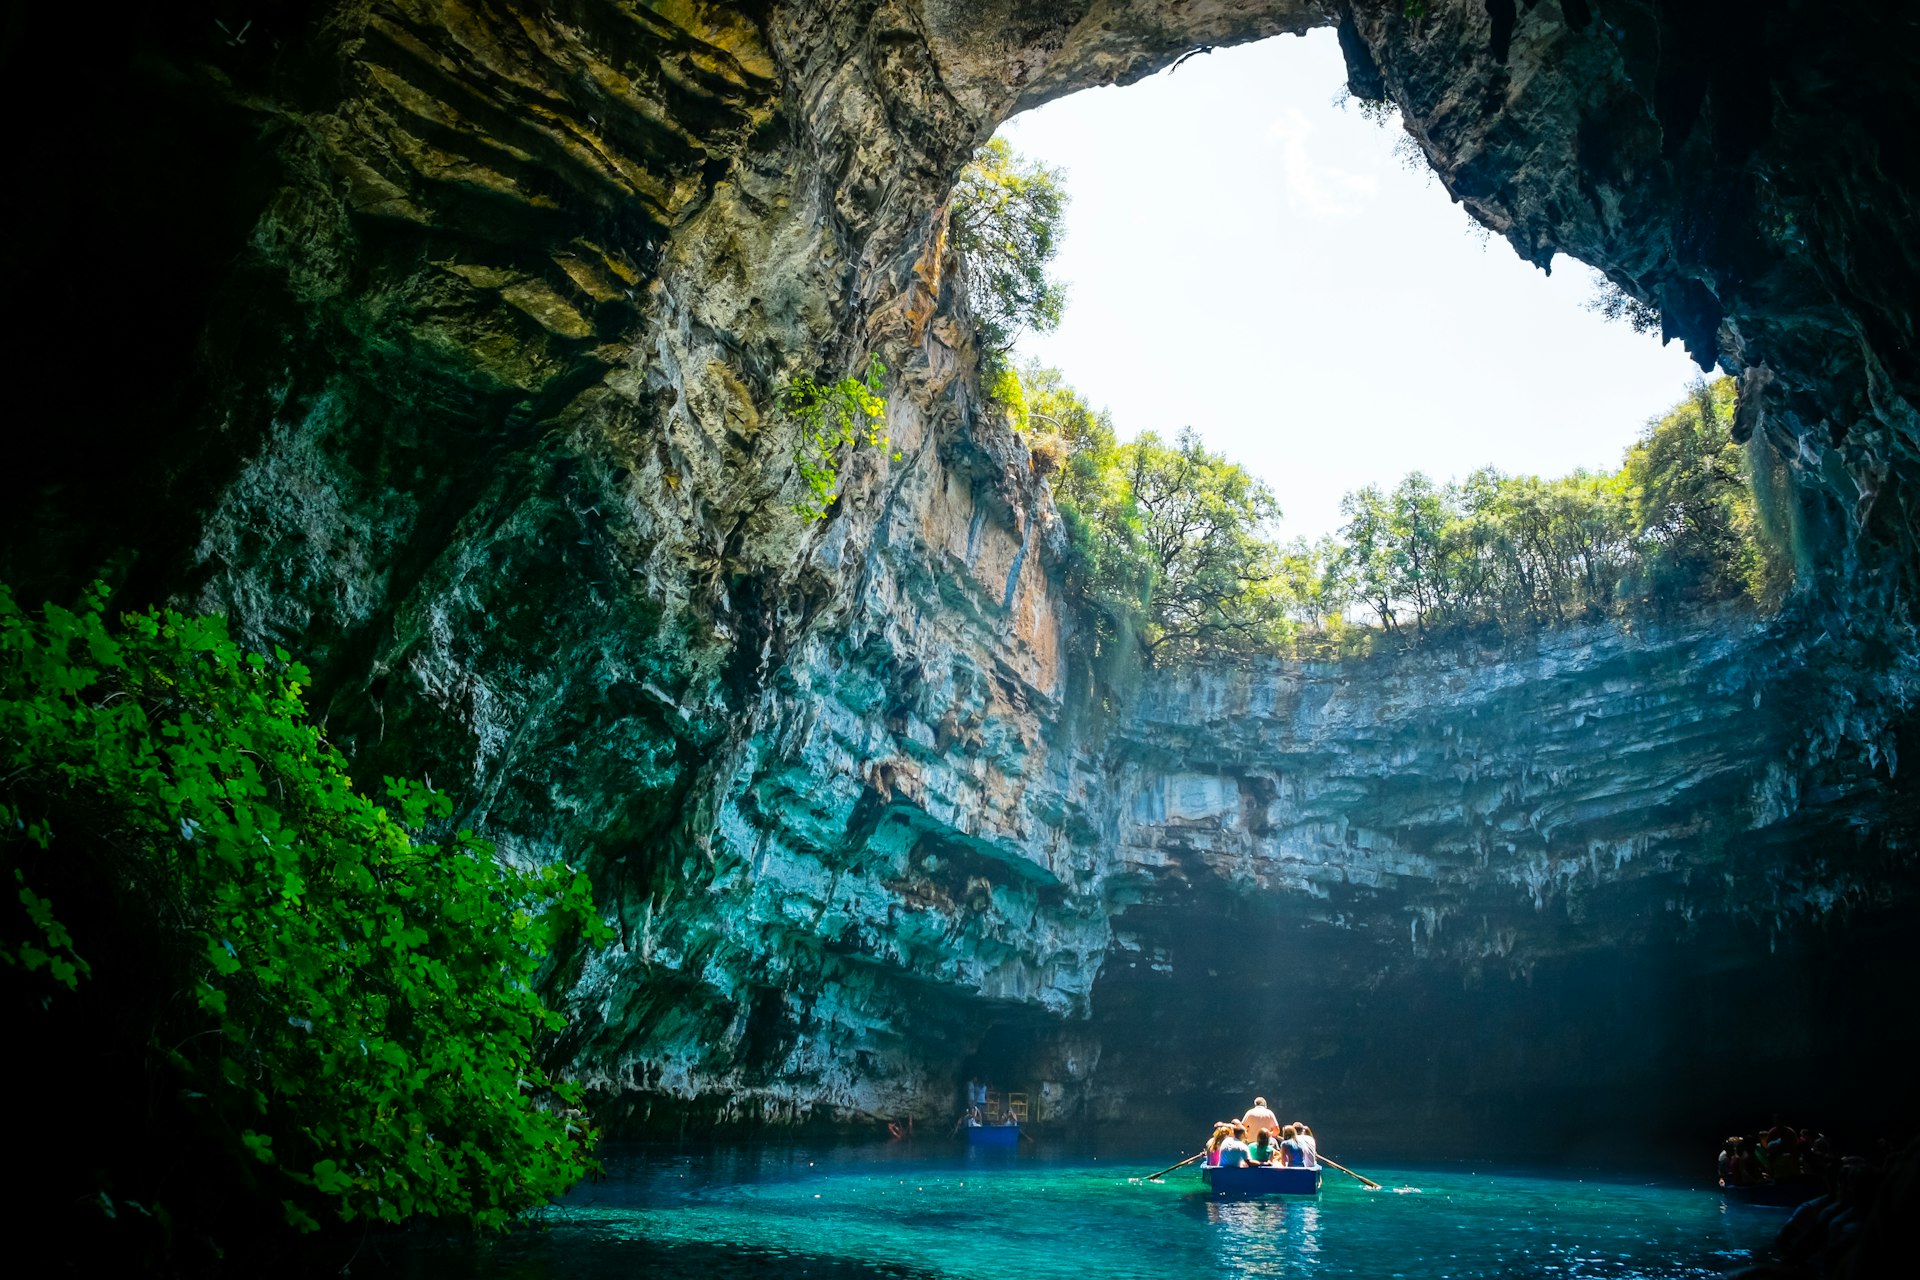 A small boat loaded with passengers in a huge cavern with bright turquoise waters below